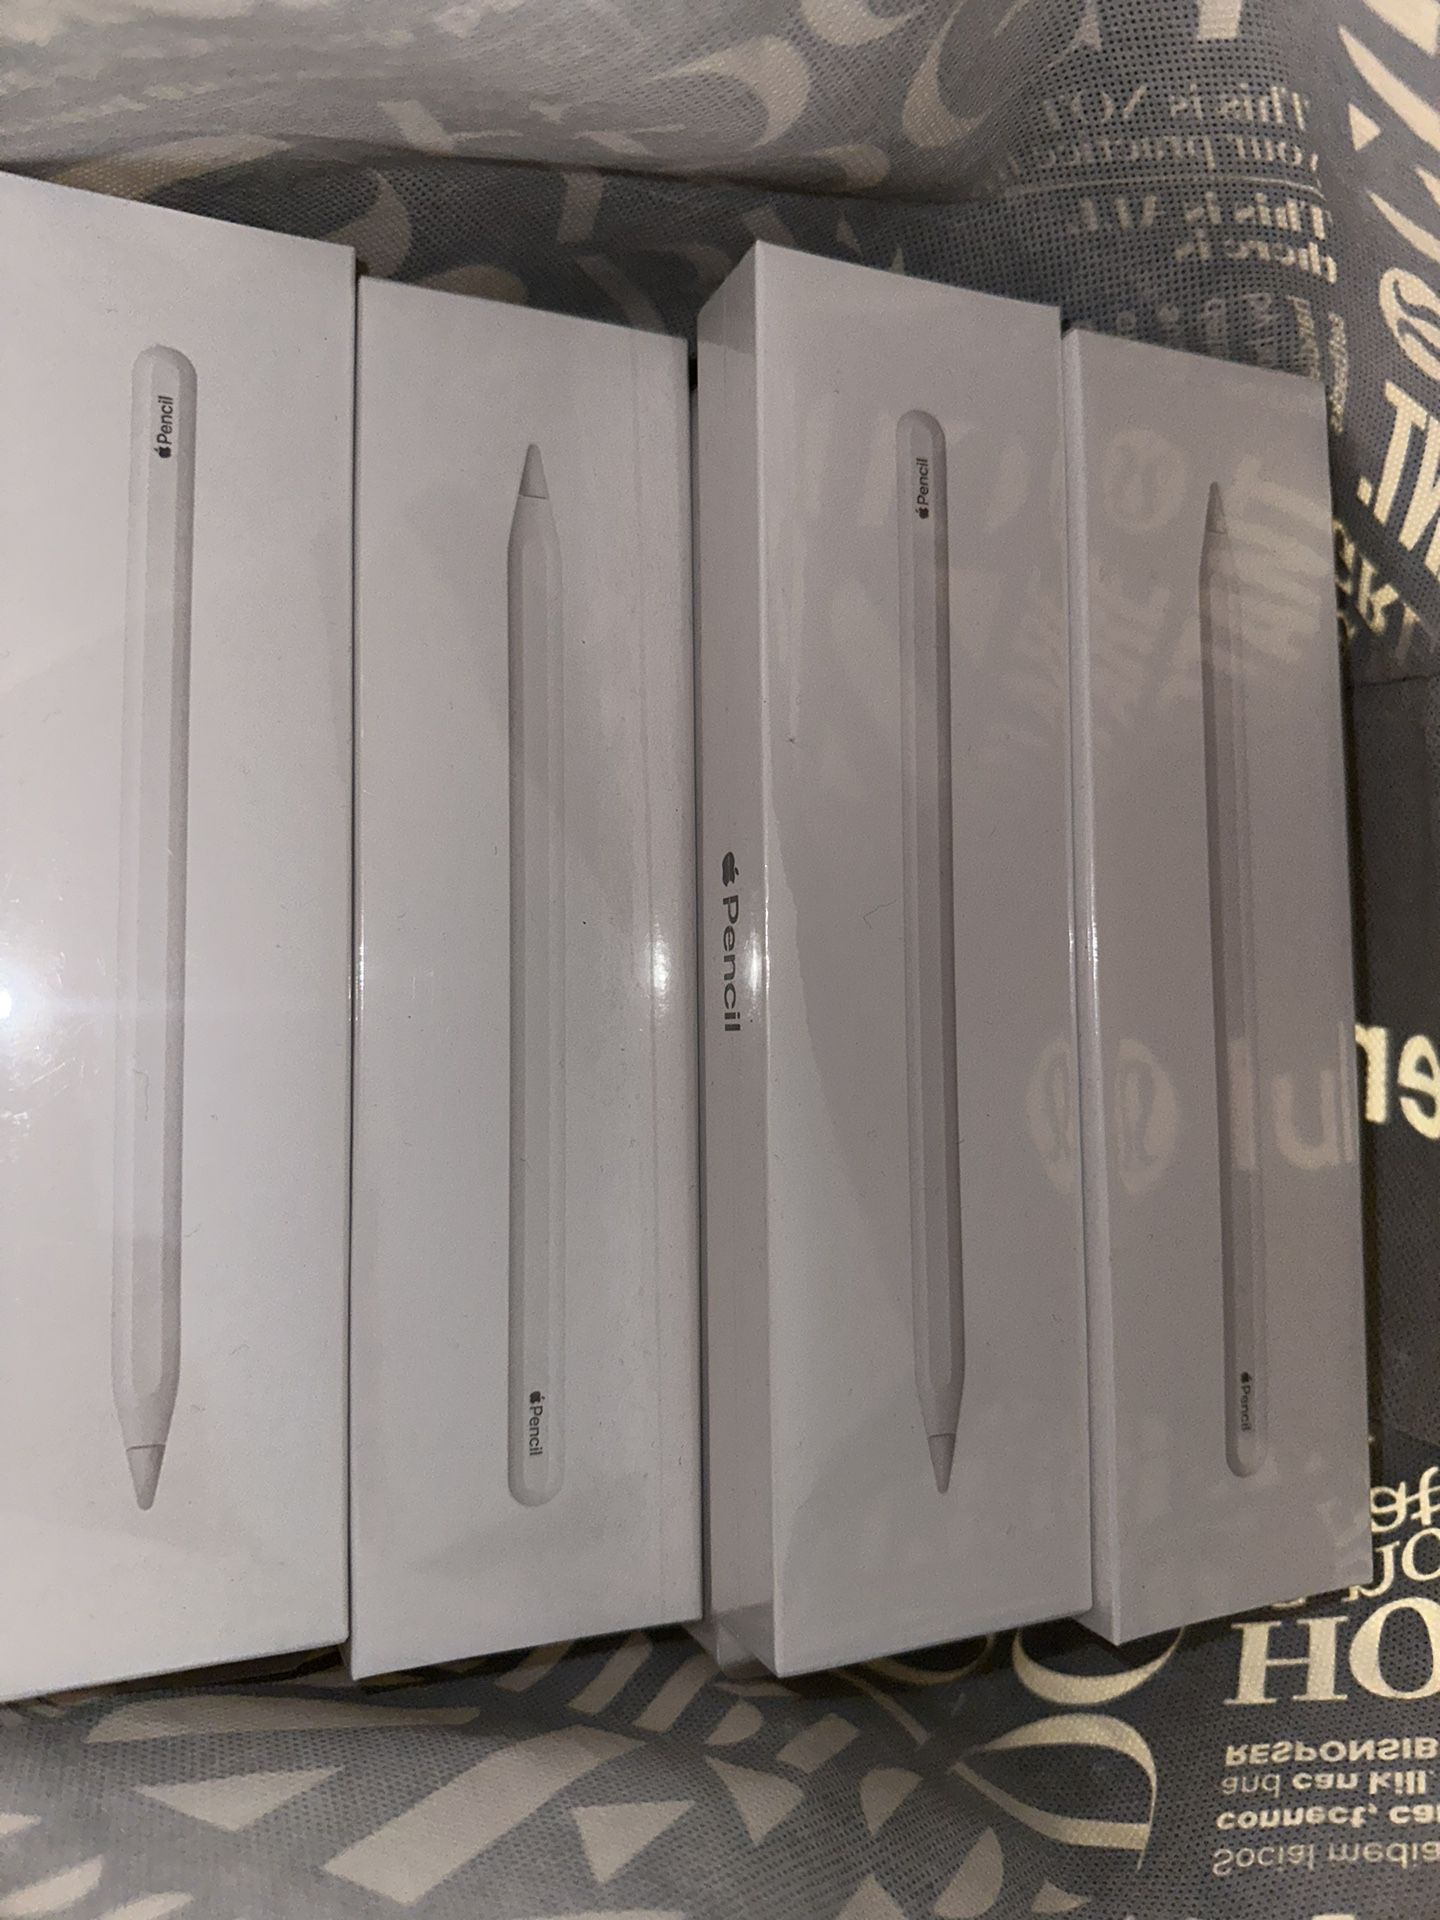 Apple Pencil 2nd Generation New Sealed Brand New $110 Each For iPad Pro Or iPad Air Or iPad Mini 